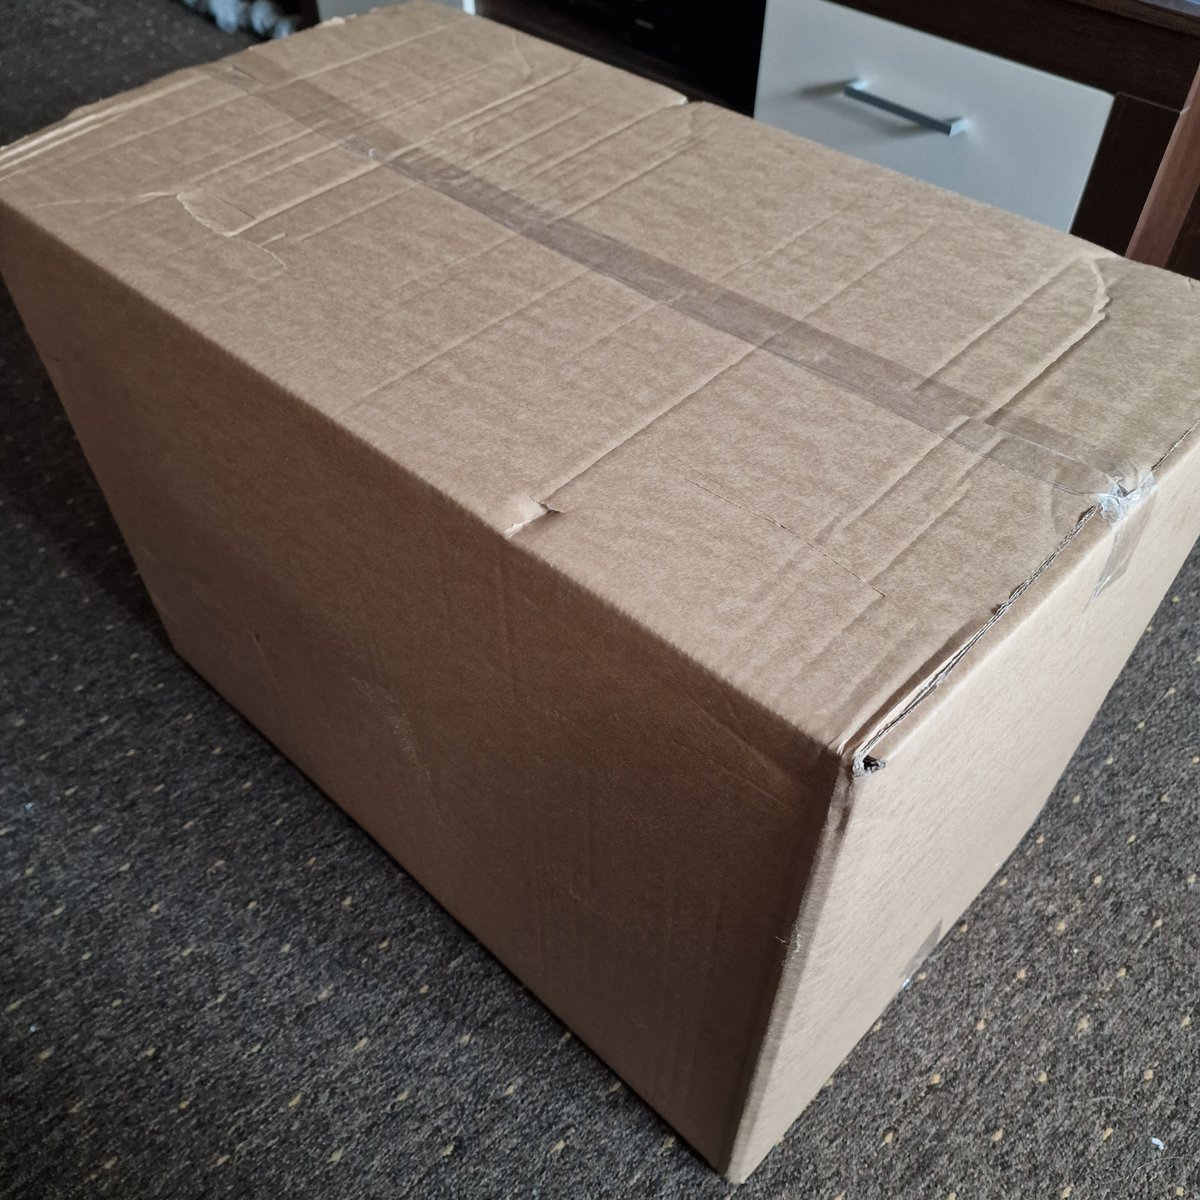 Yay! Got a delivery today. What do you think it is?😉😁 Just a little hint: it's for the #PS5 #GamersUnite #gamingcommunity #preorder #release